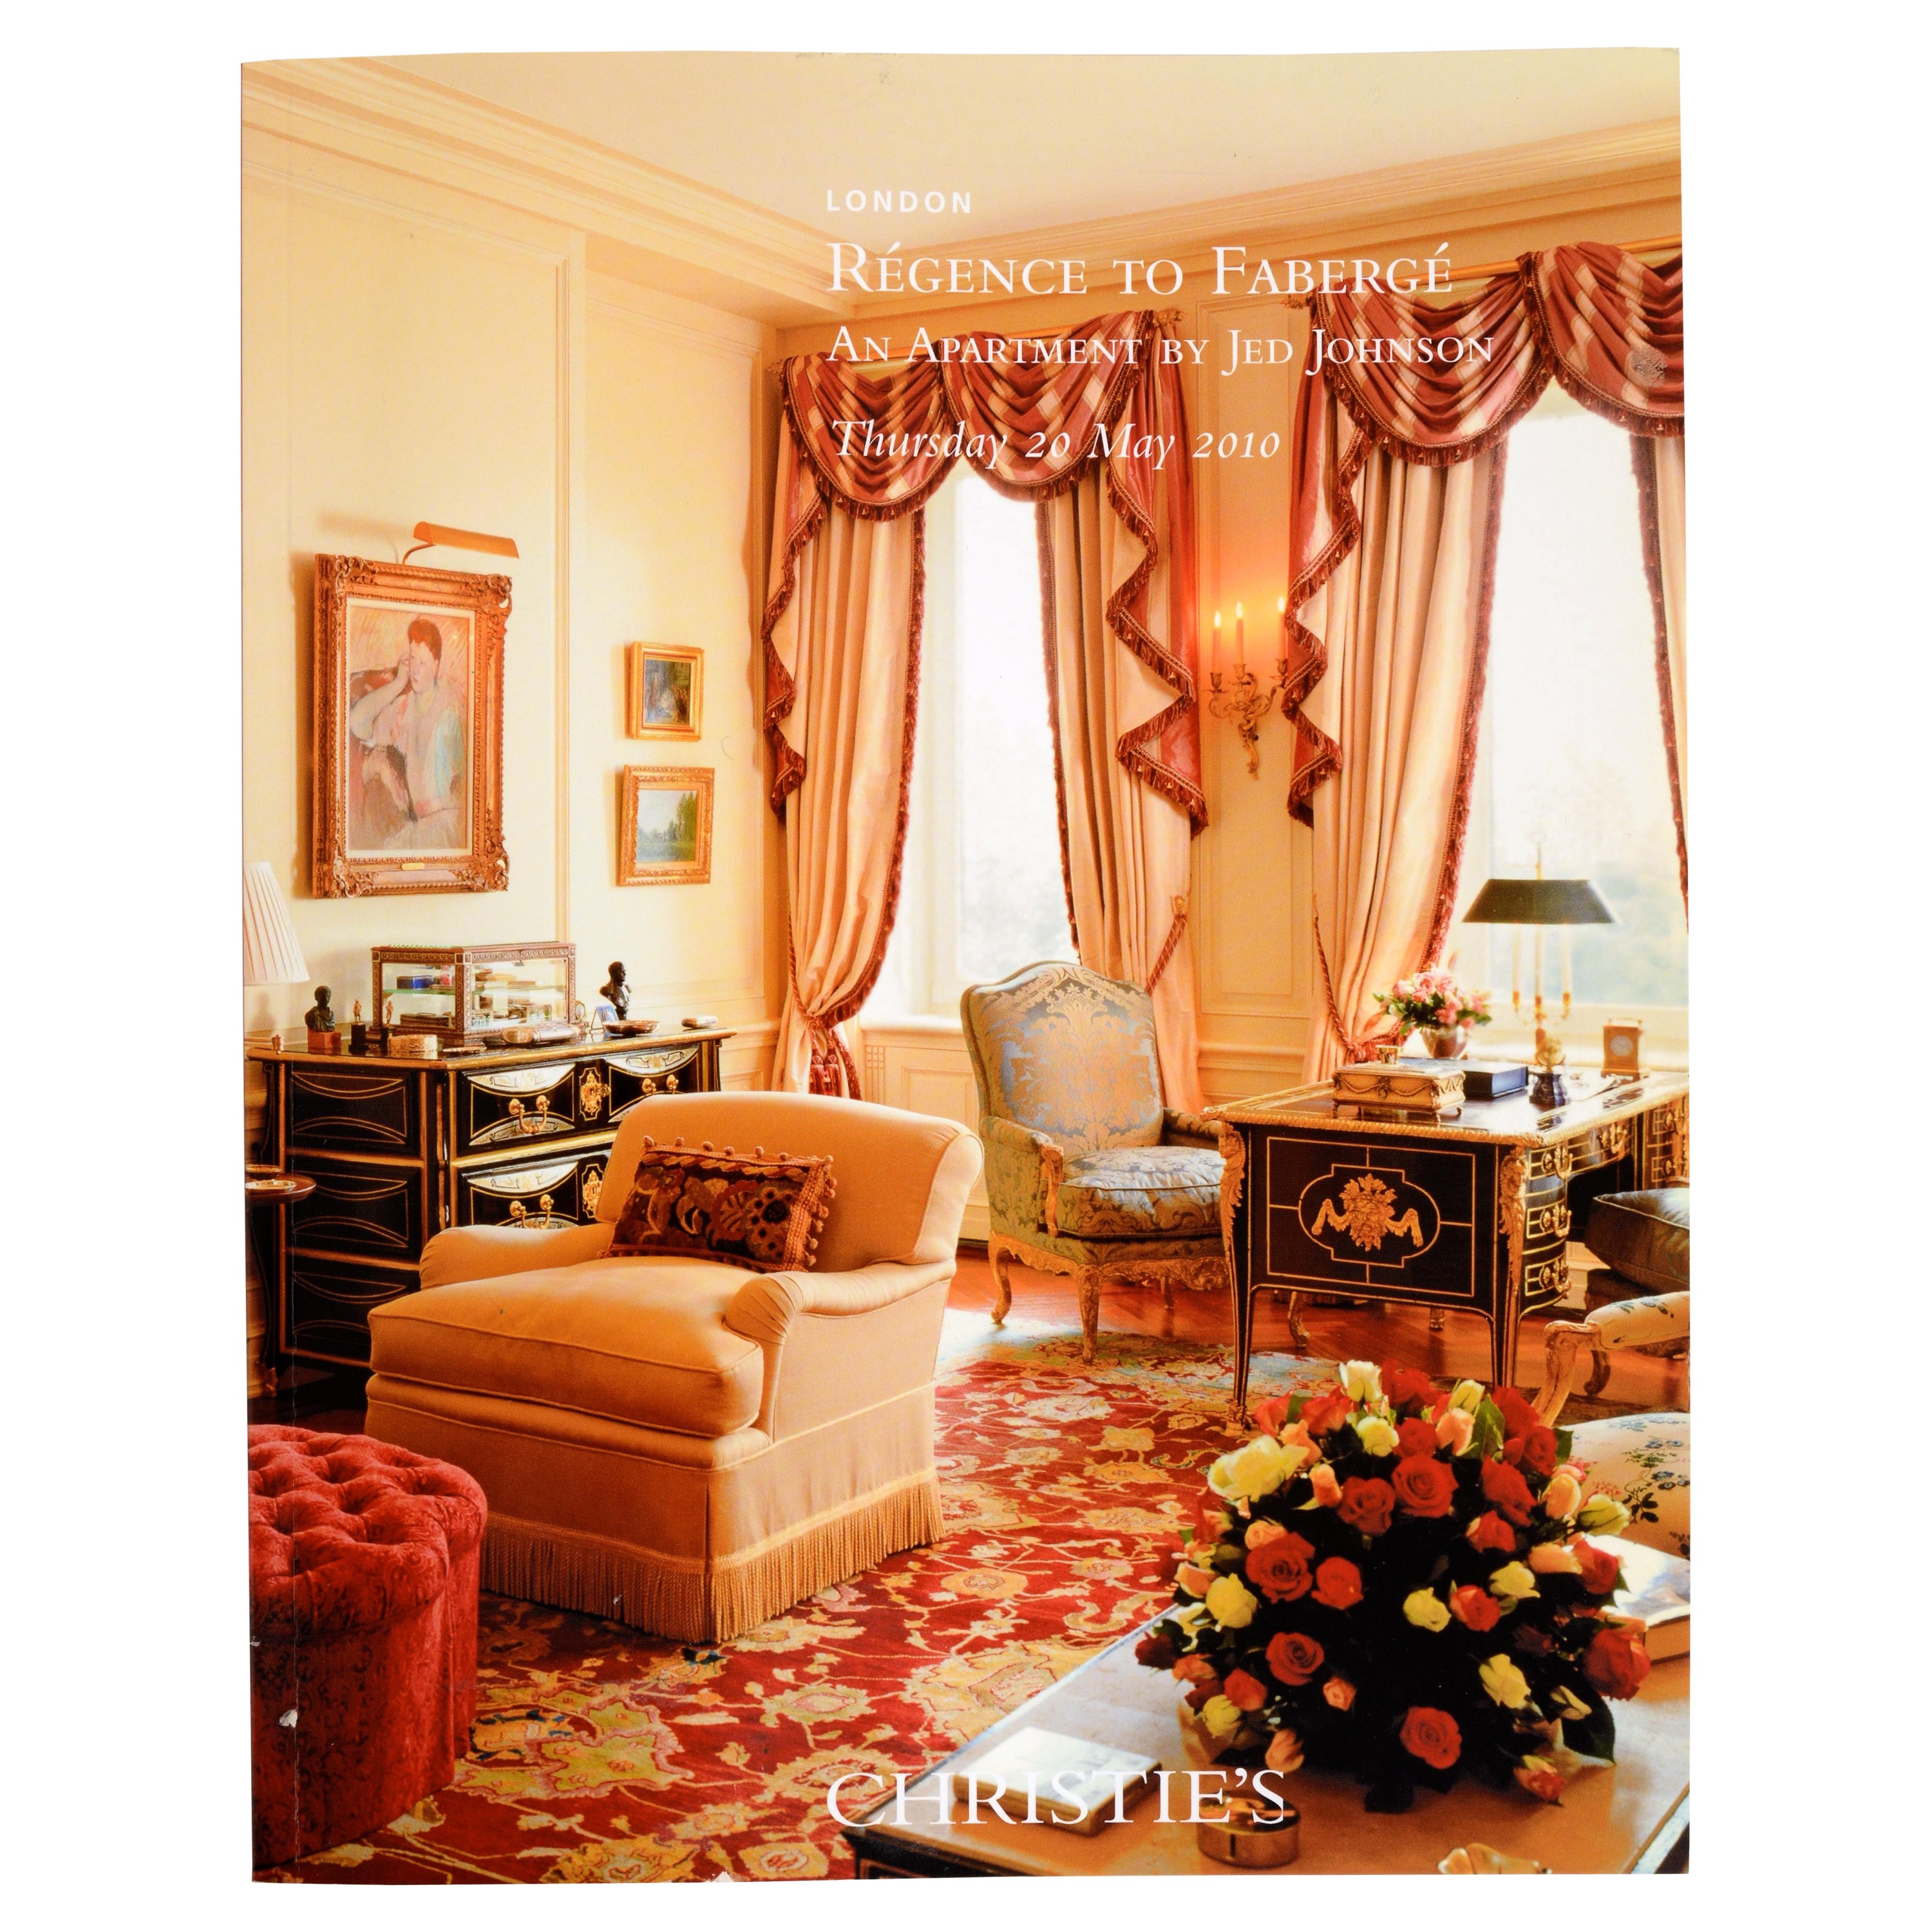 Christie's London: "Regence to Faberge. an Apartment by Jed Johnson, " May 2010 For Sale